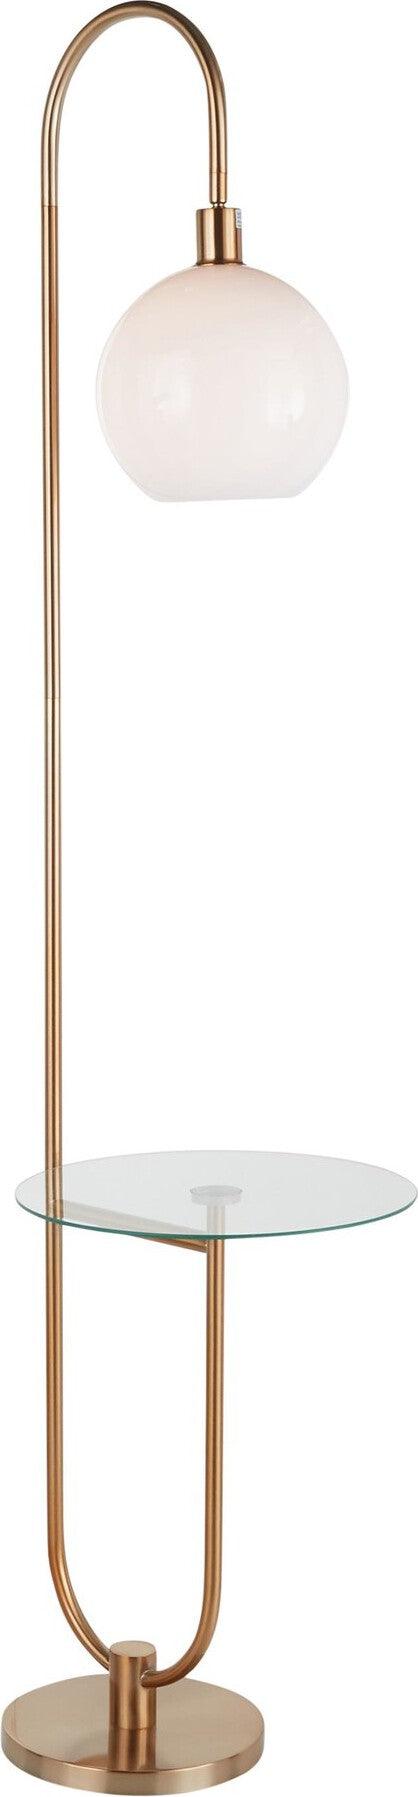 Lumisource Floor Lamps - Trombone Floor Lamp with Table Gold & White